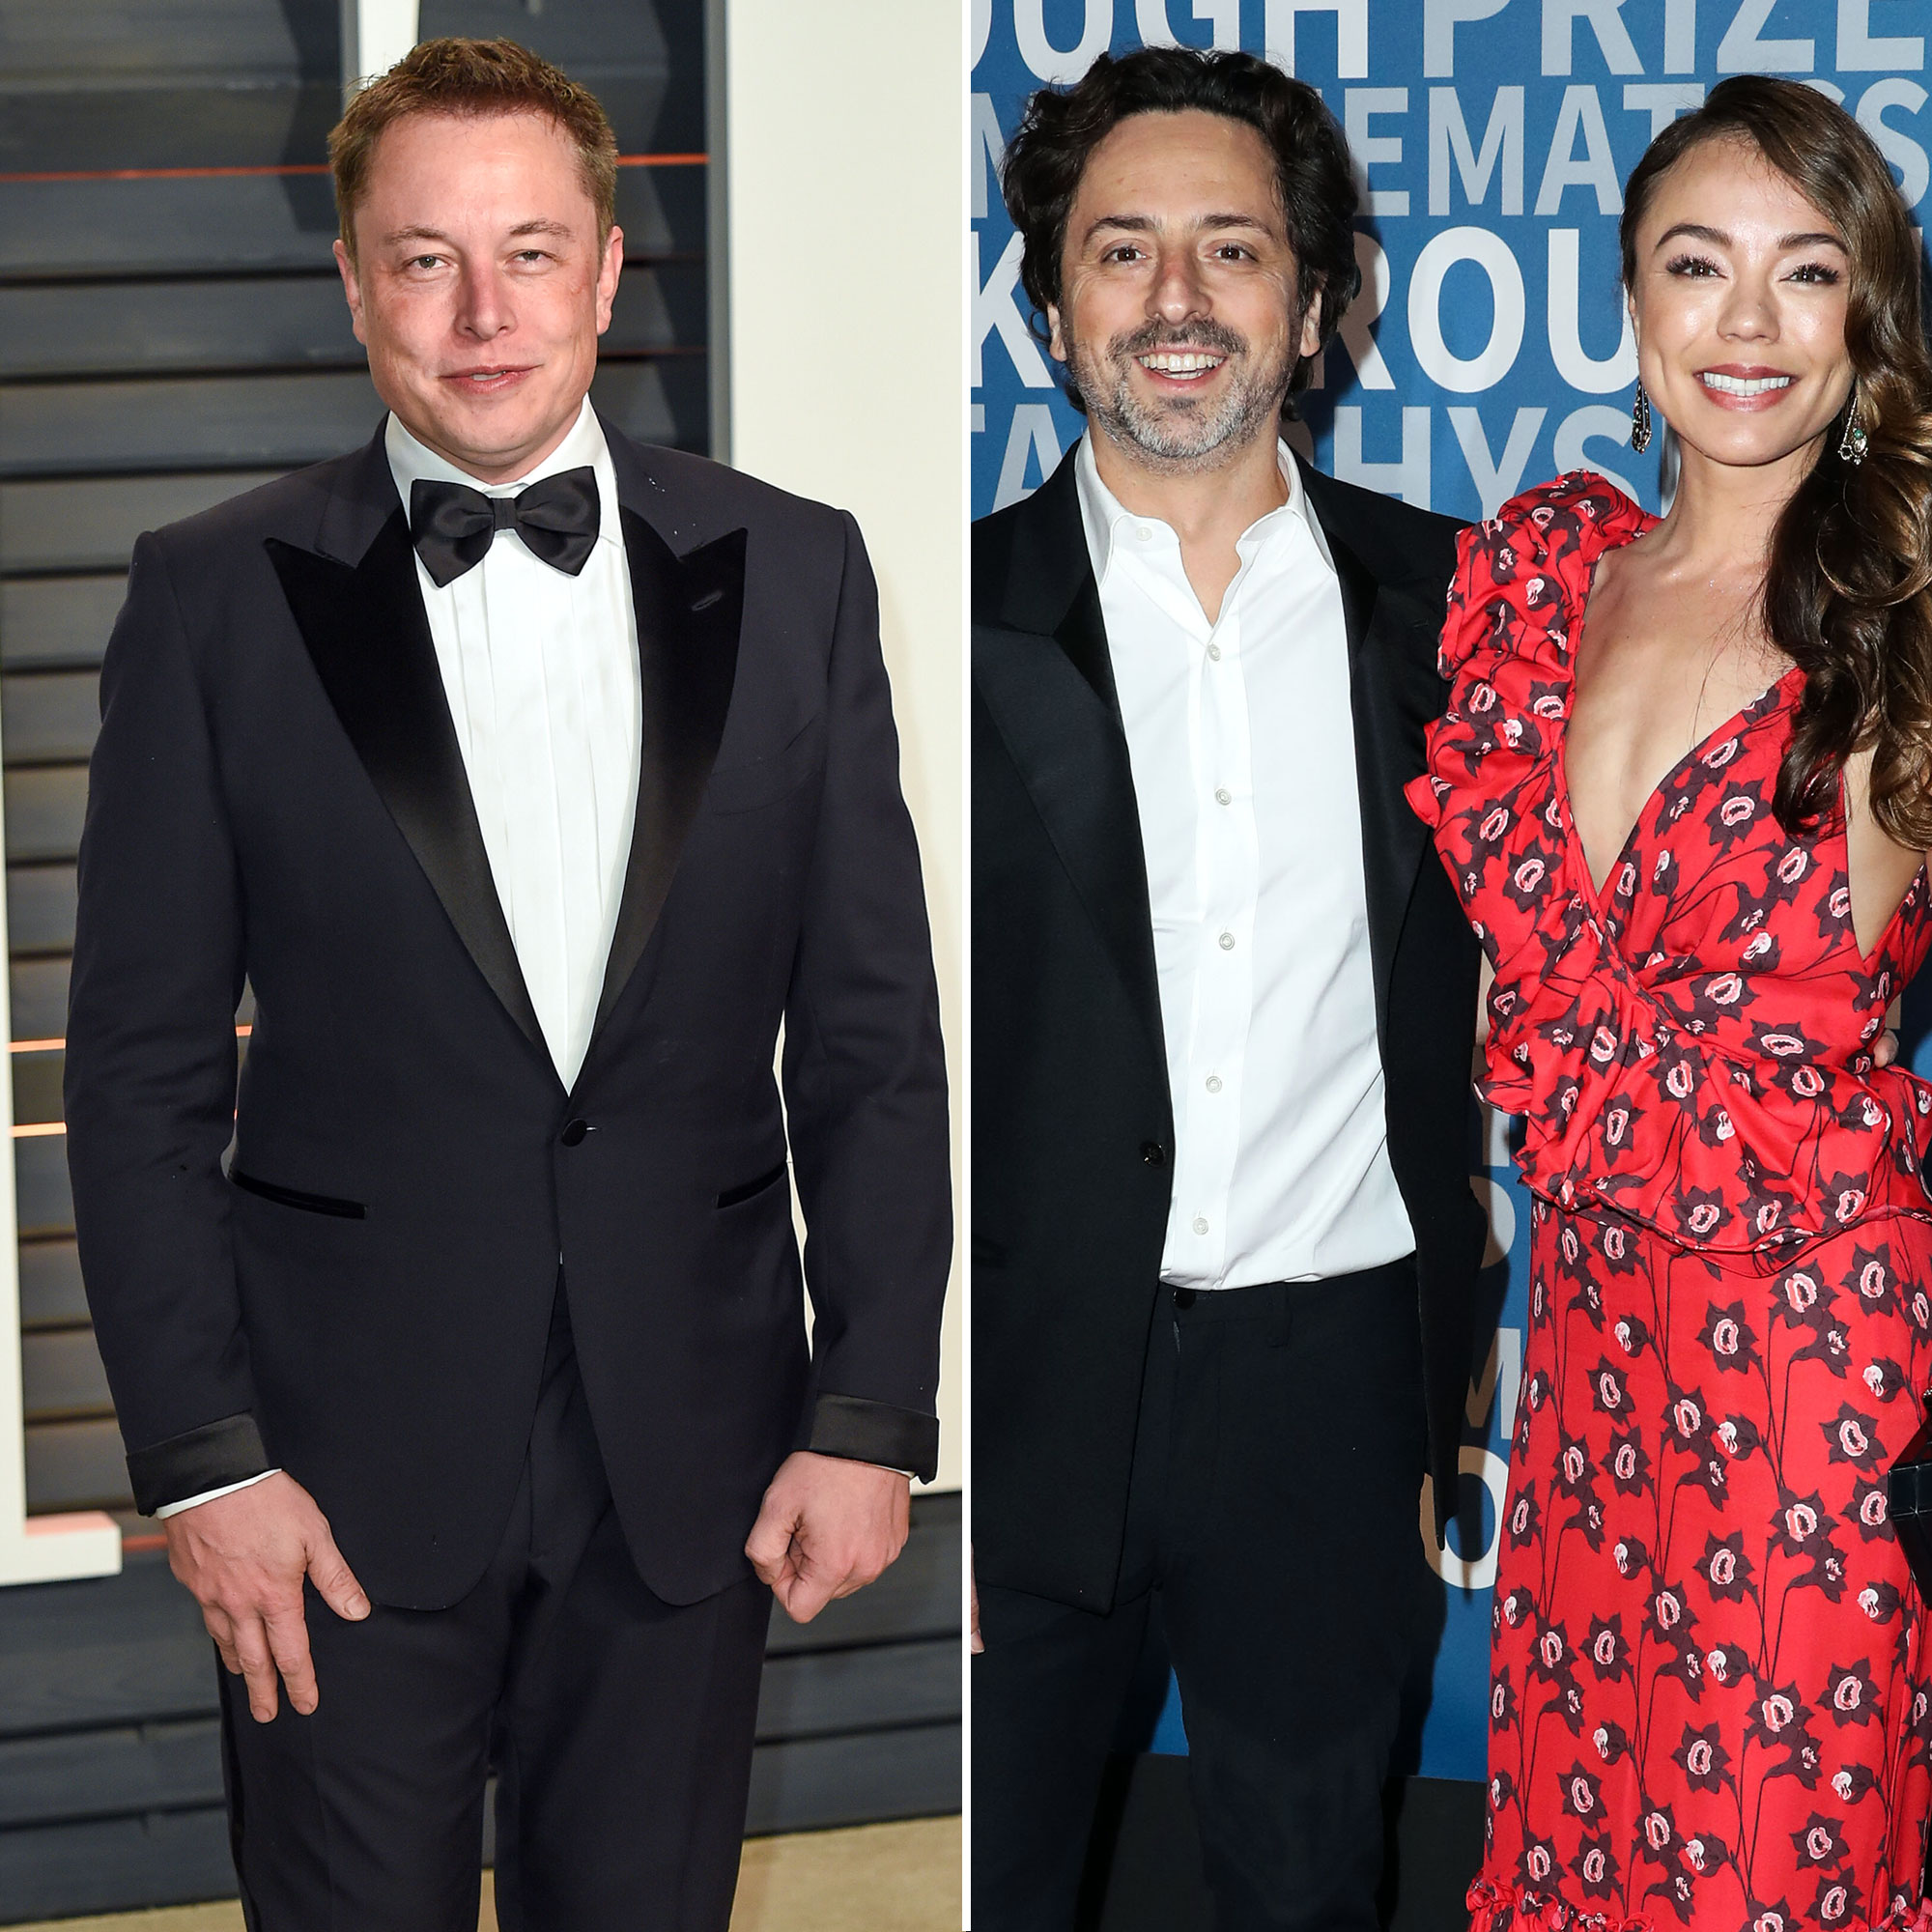 Elon Musk Denies Affair With Google Execs Wife What to Know image pic